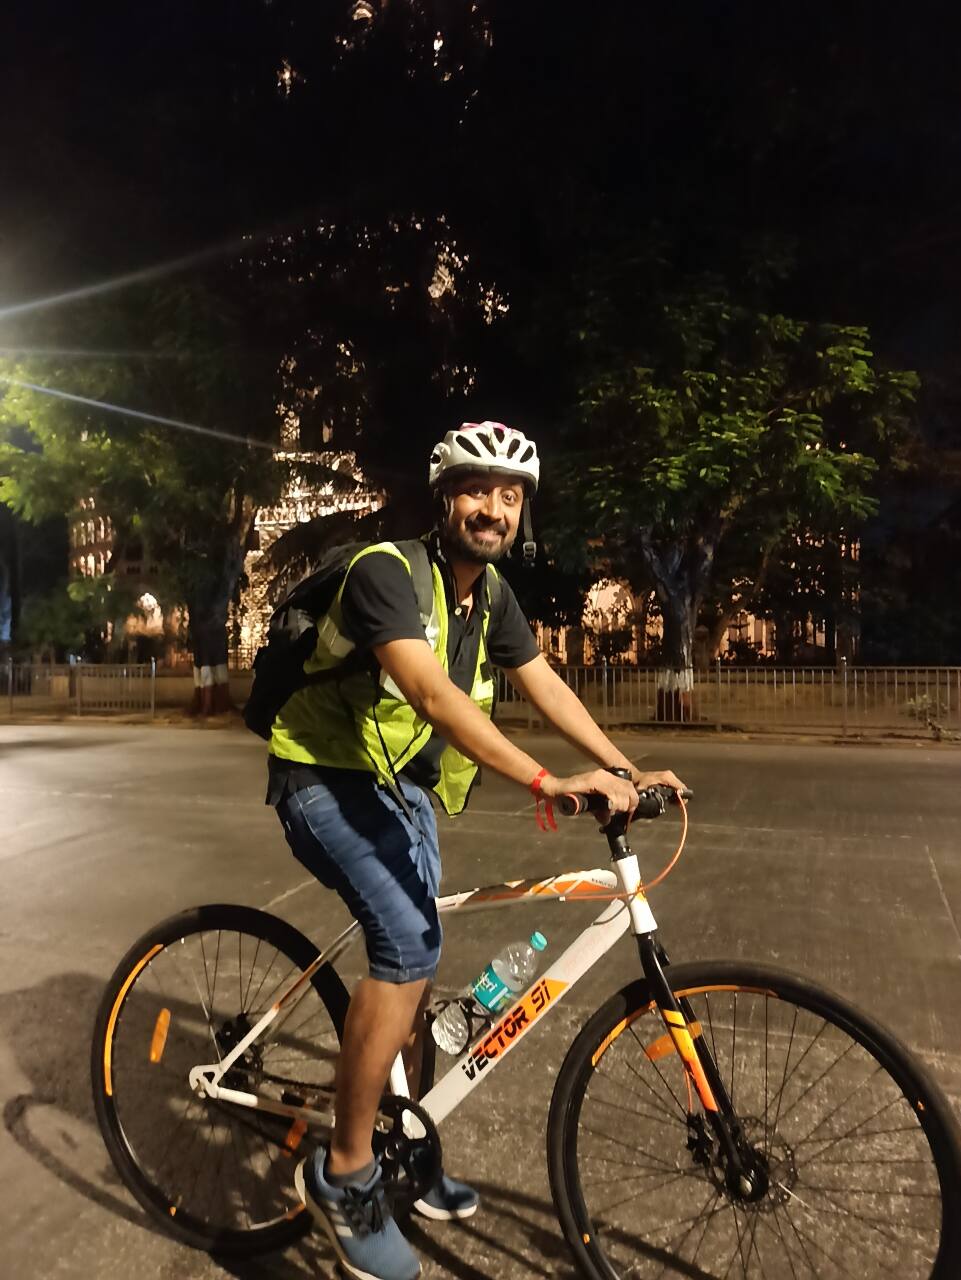 All set for The Legends of Bombay Bards cycling Tour